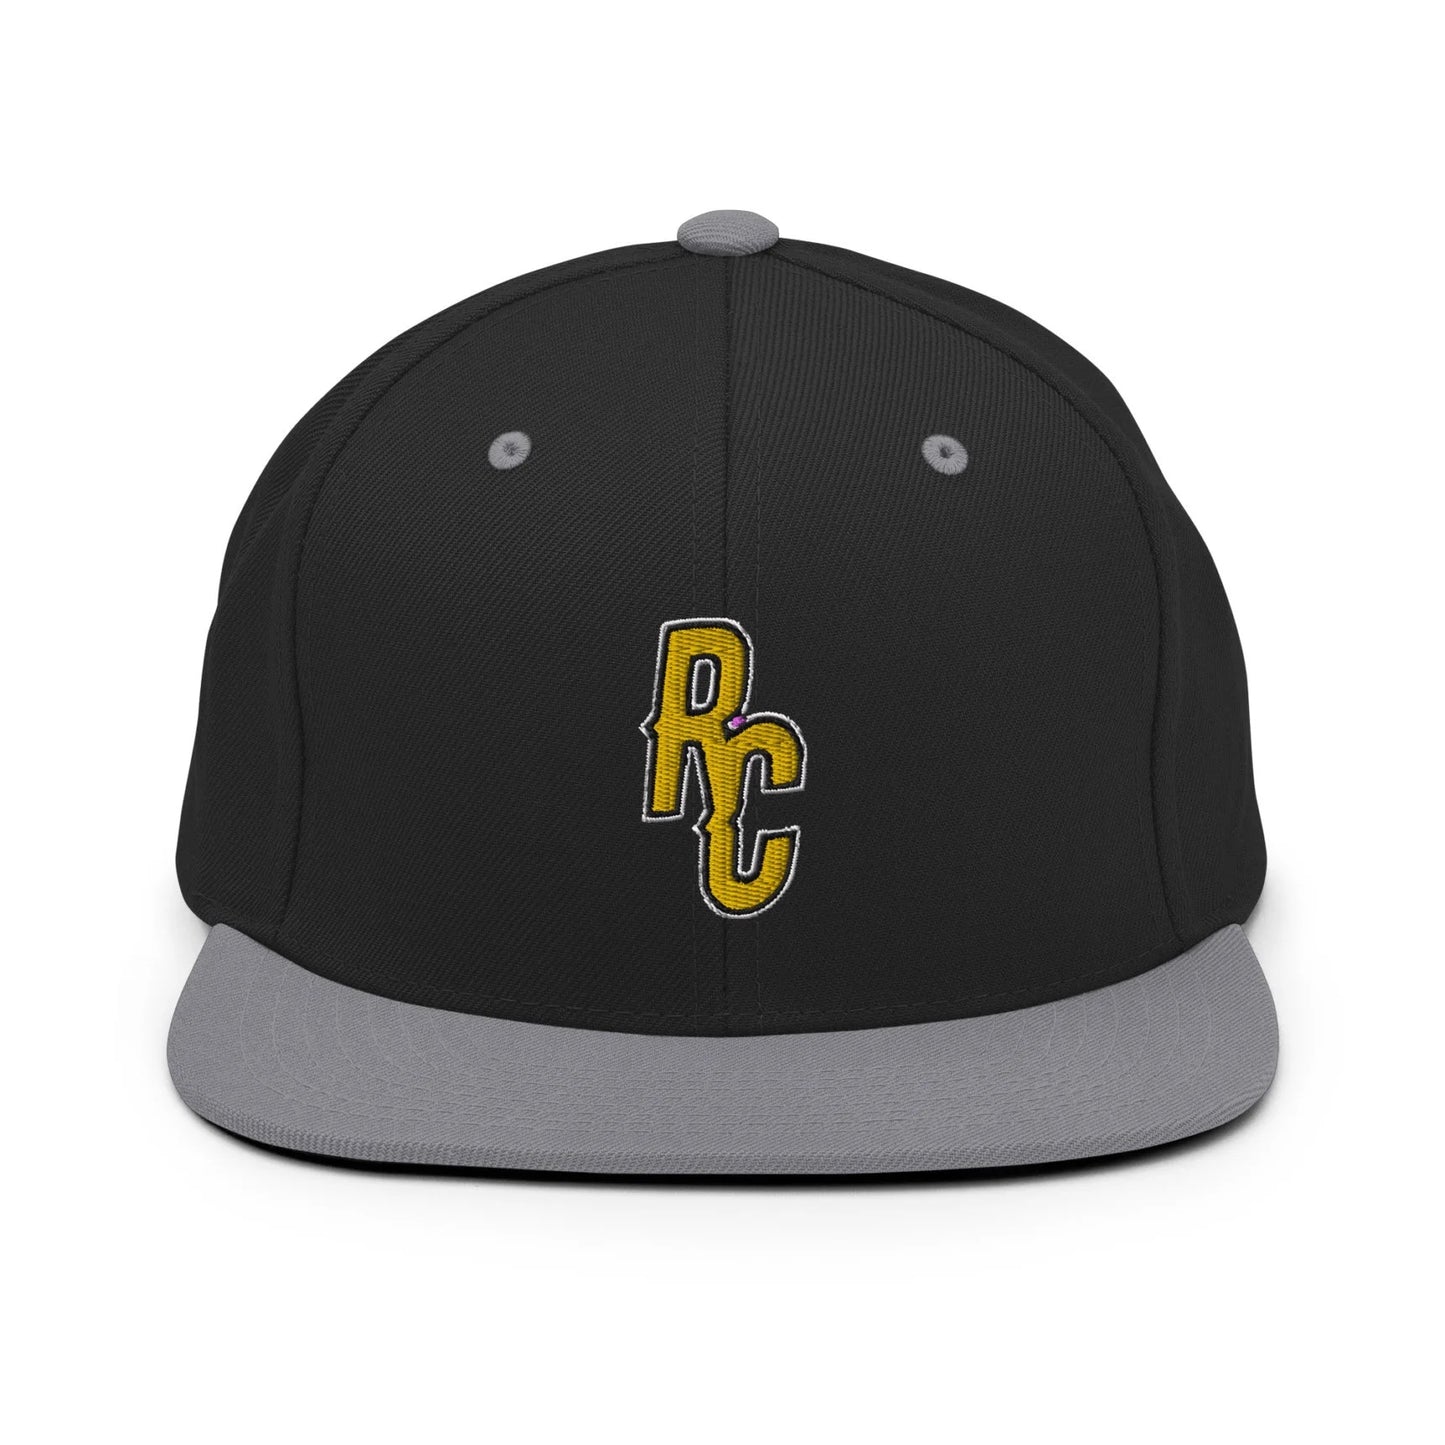 Ray Cheesy ShowZone snapback hat in black with grey brim and accents